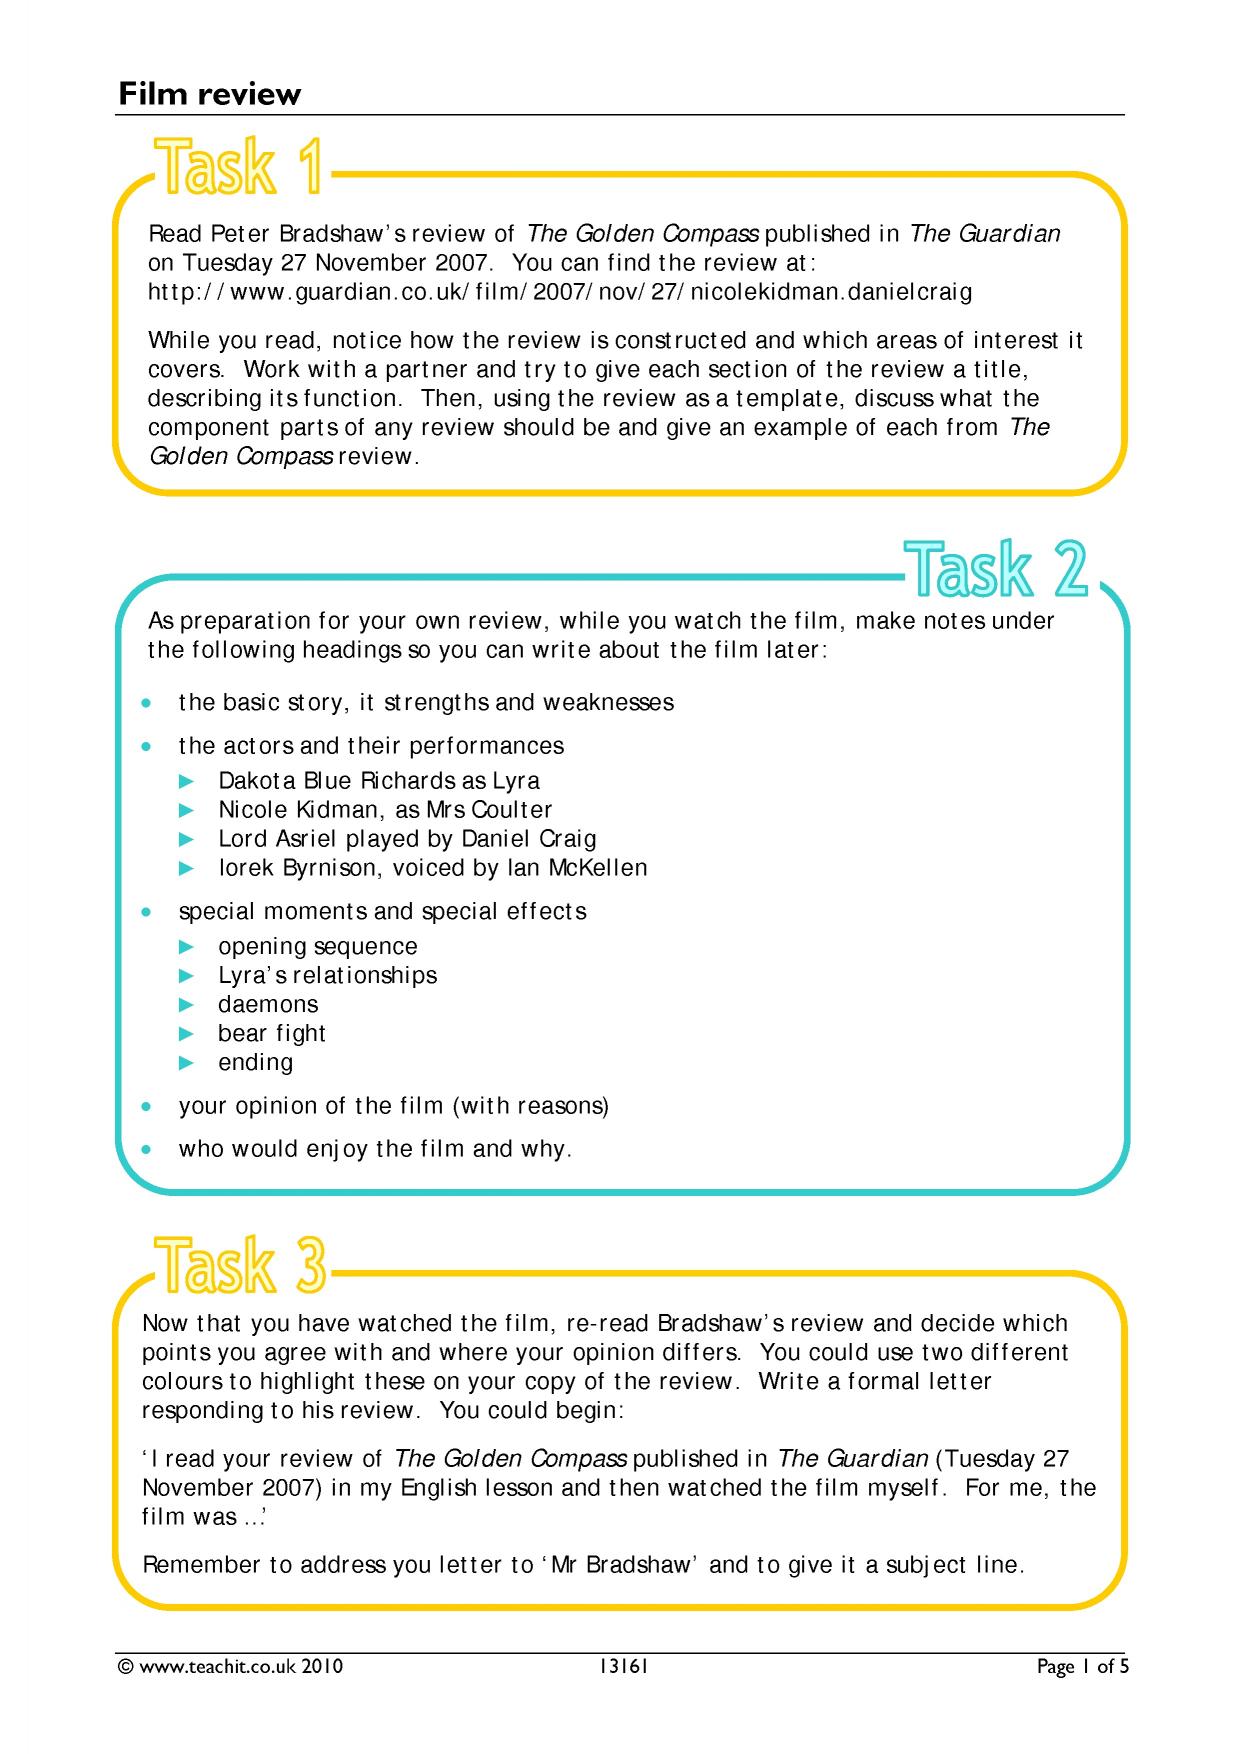 Key stage 2 tests: applying for a review of pupils’ test results